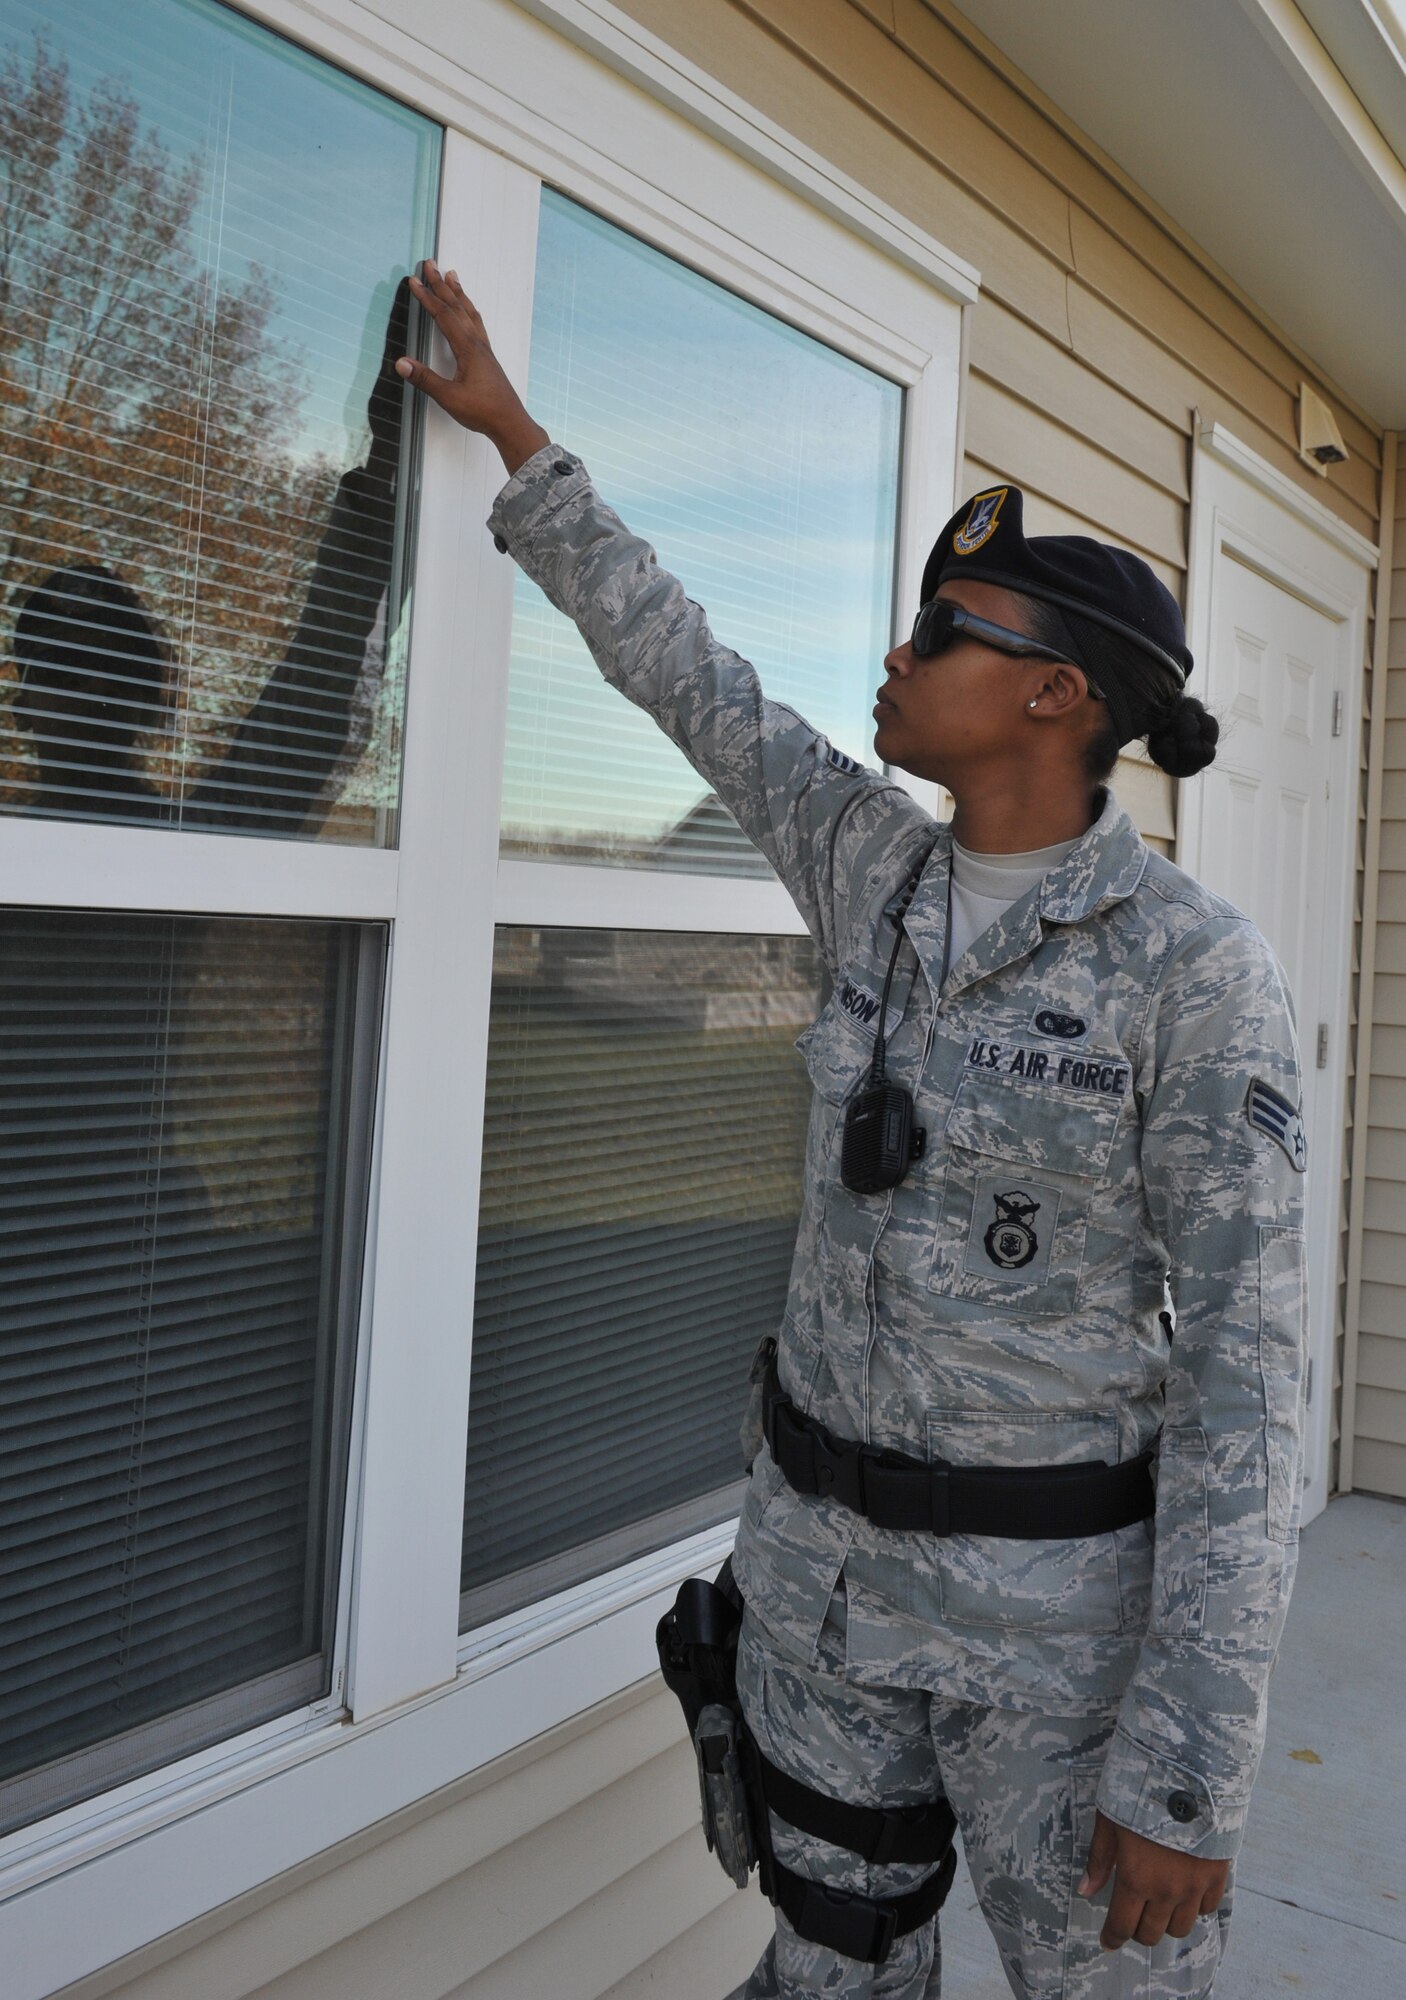 Senior Airman Keena Johnson, 509th Security Forces Squadron Law Enforcement, checks a window for broken glass which can be a sign of a forced entry during her shift at Whiteman Air Force Base housing Nov. 13. Base residents can sign up for Operation Quarters Watch before they leave for vacation and 509th SFS will make a physical check on their homes. (U.S. Air Force photo/Heidi Hunt) (Released)